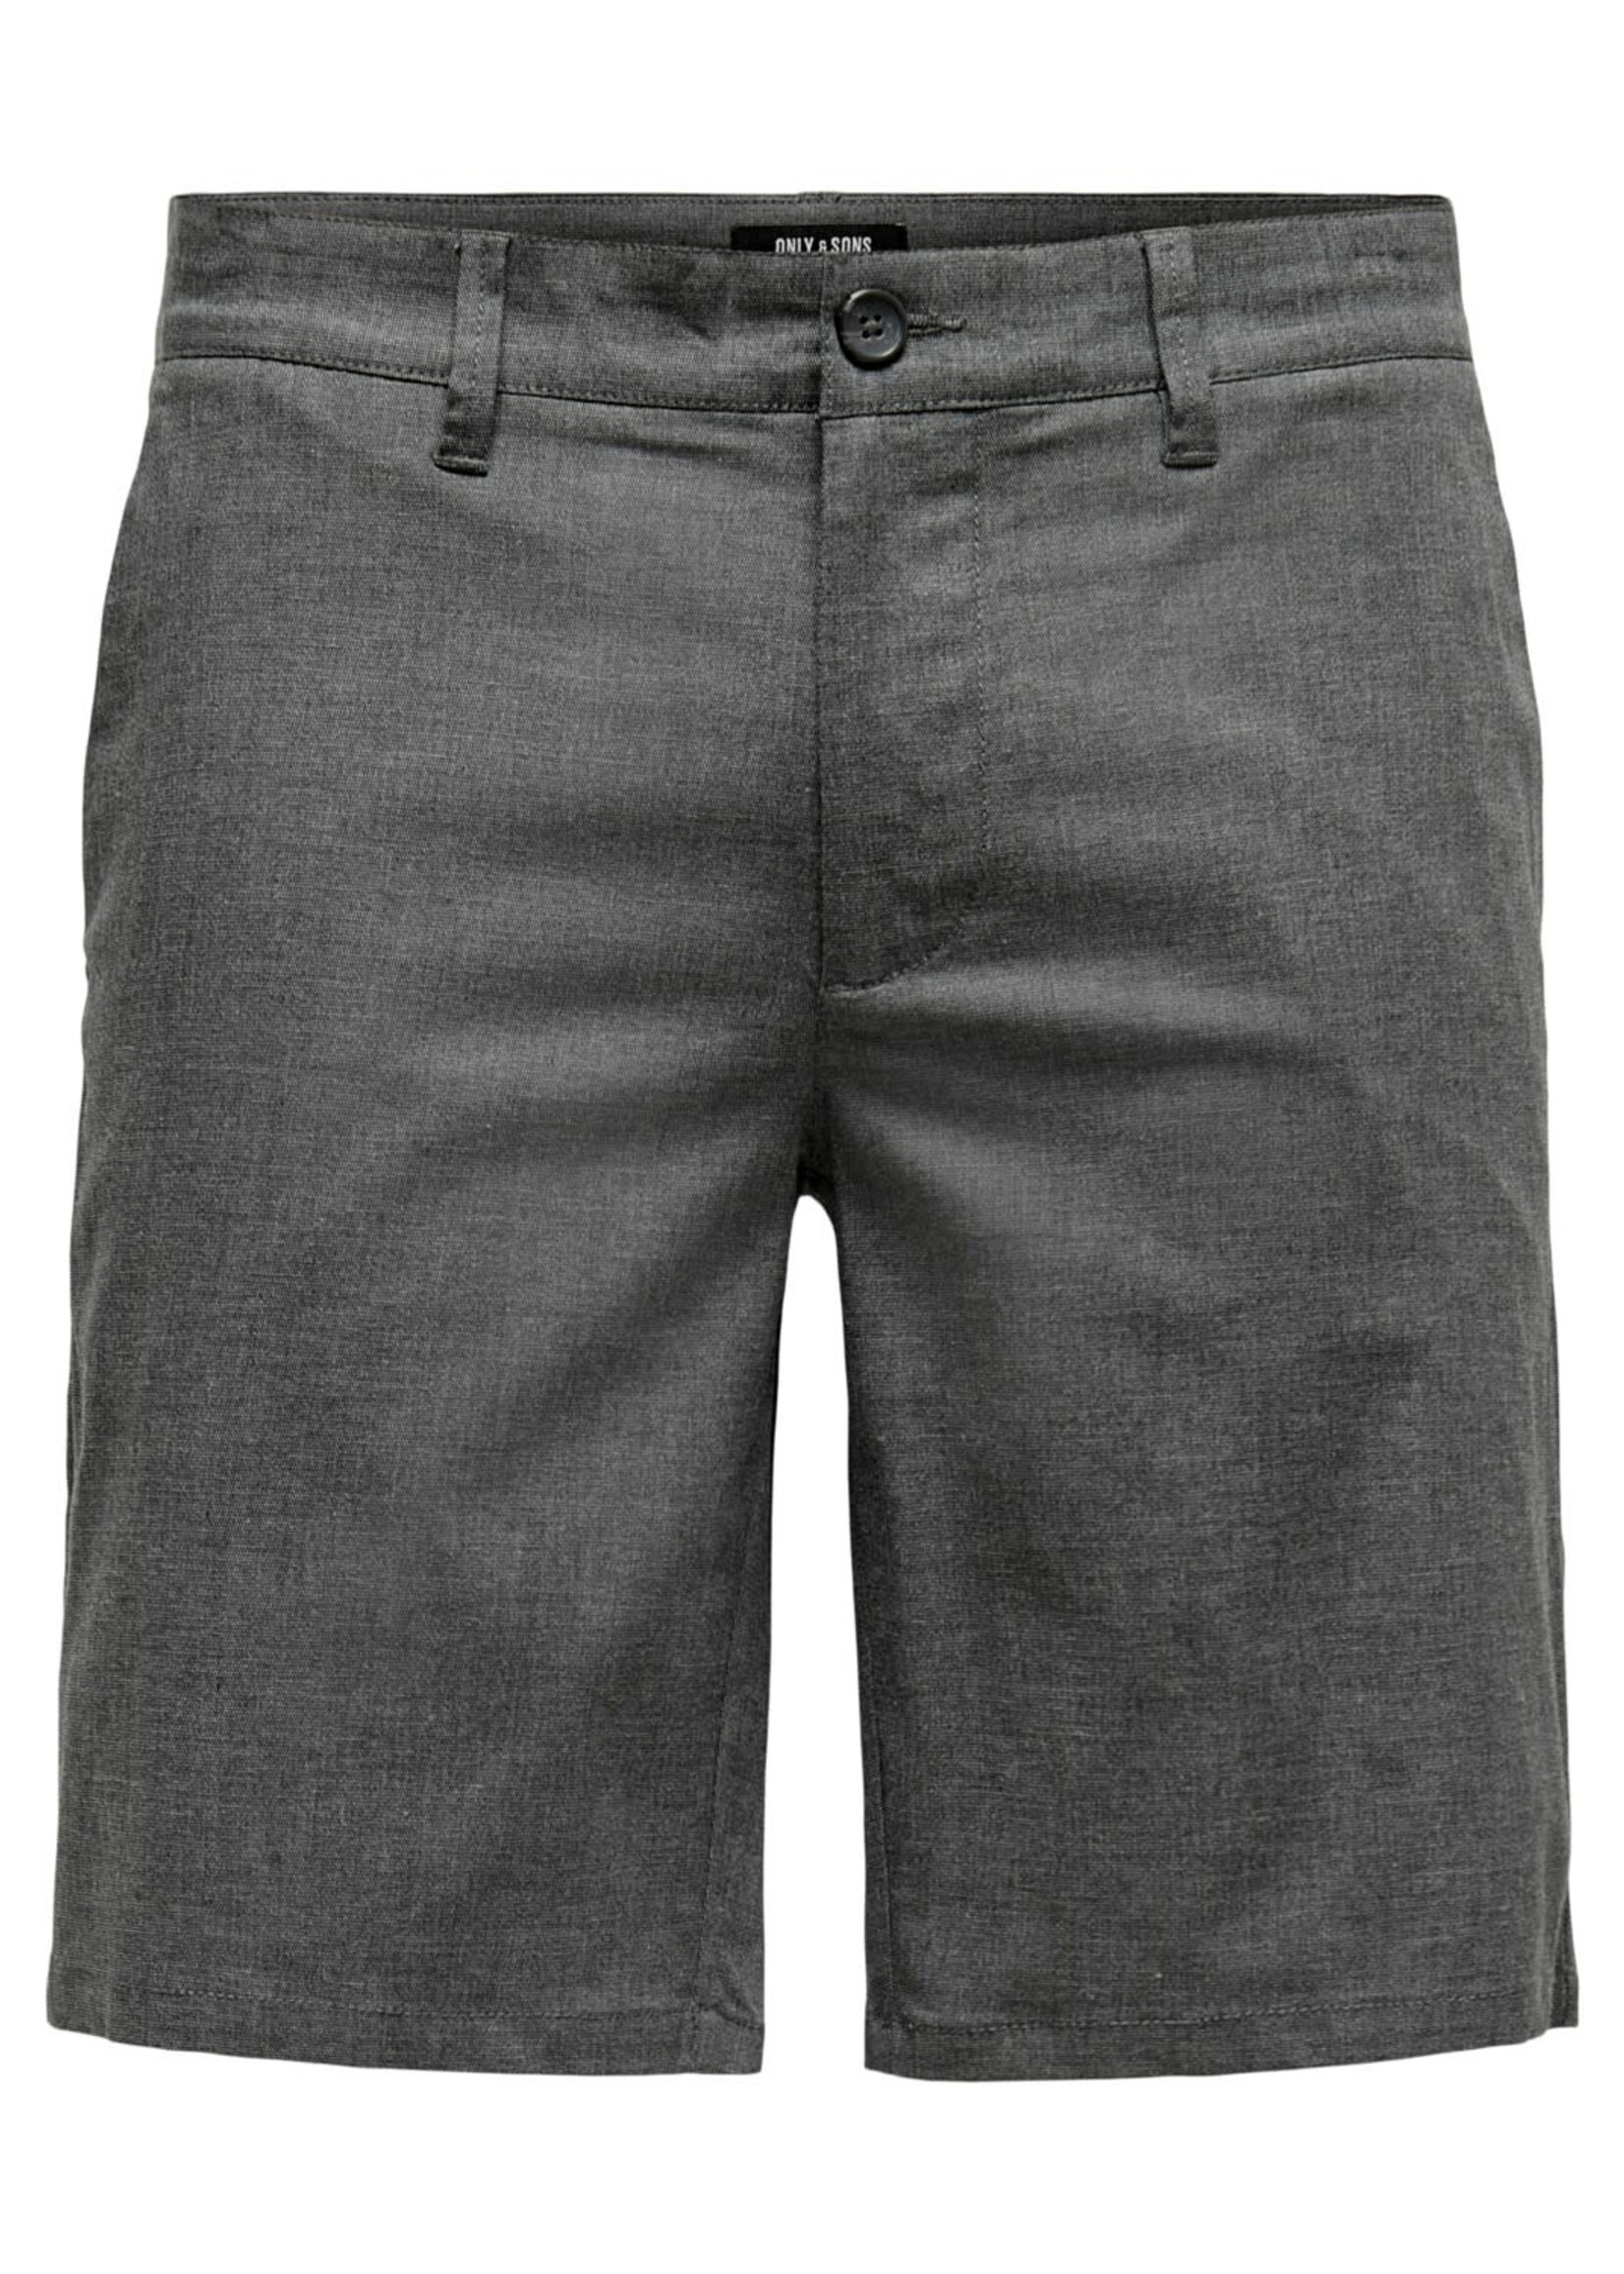 Only & Sons Mark Tap Short Grau